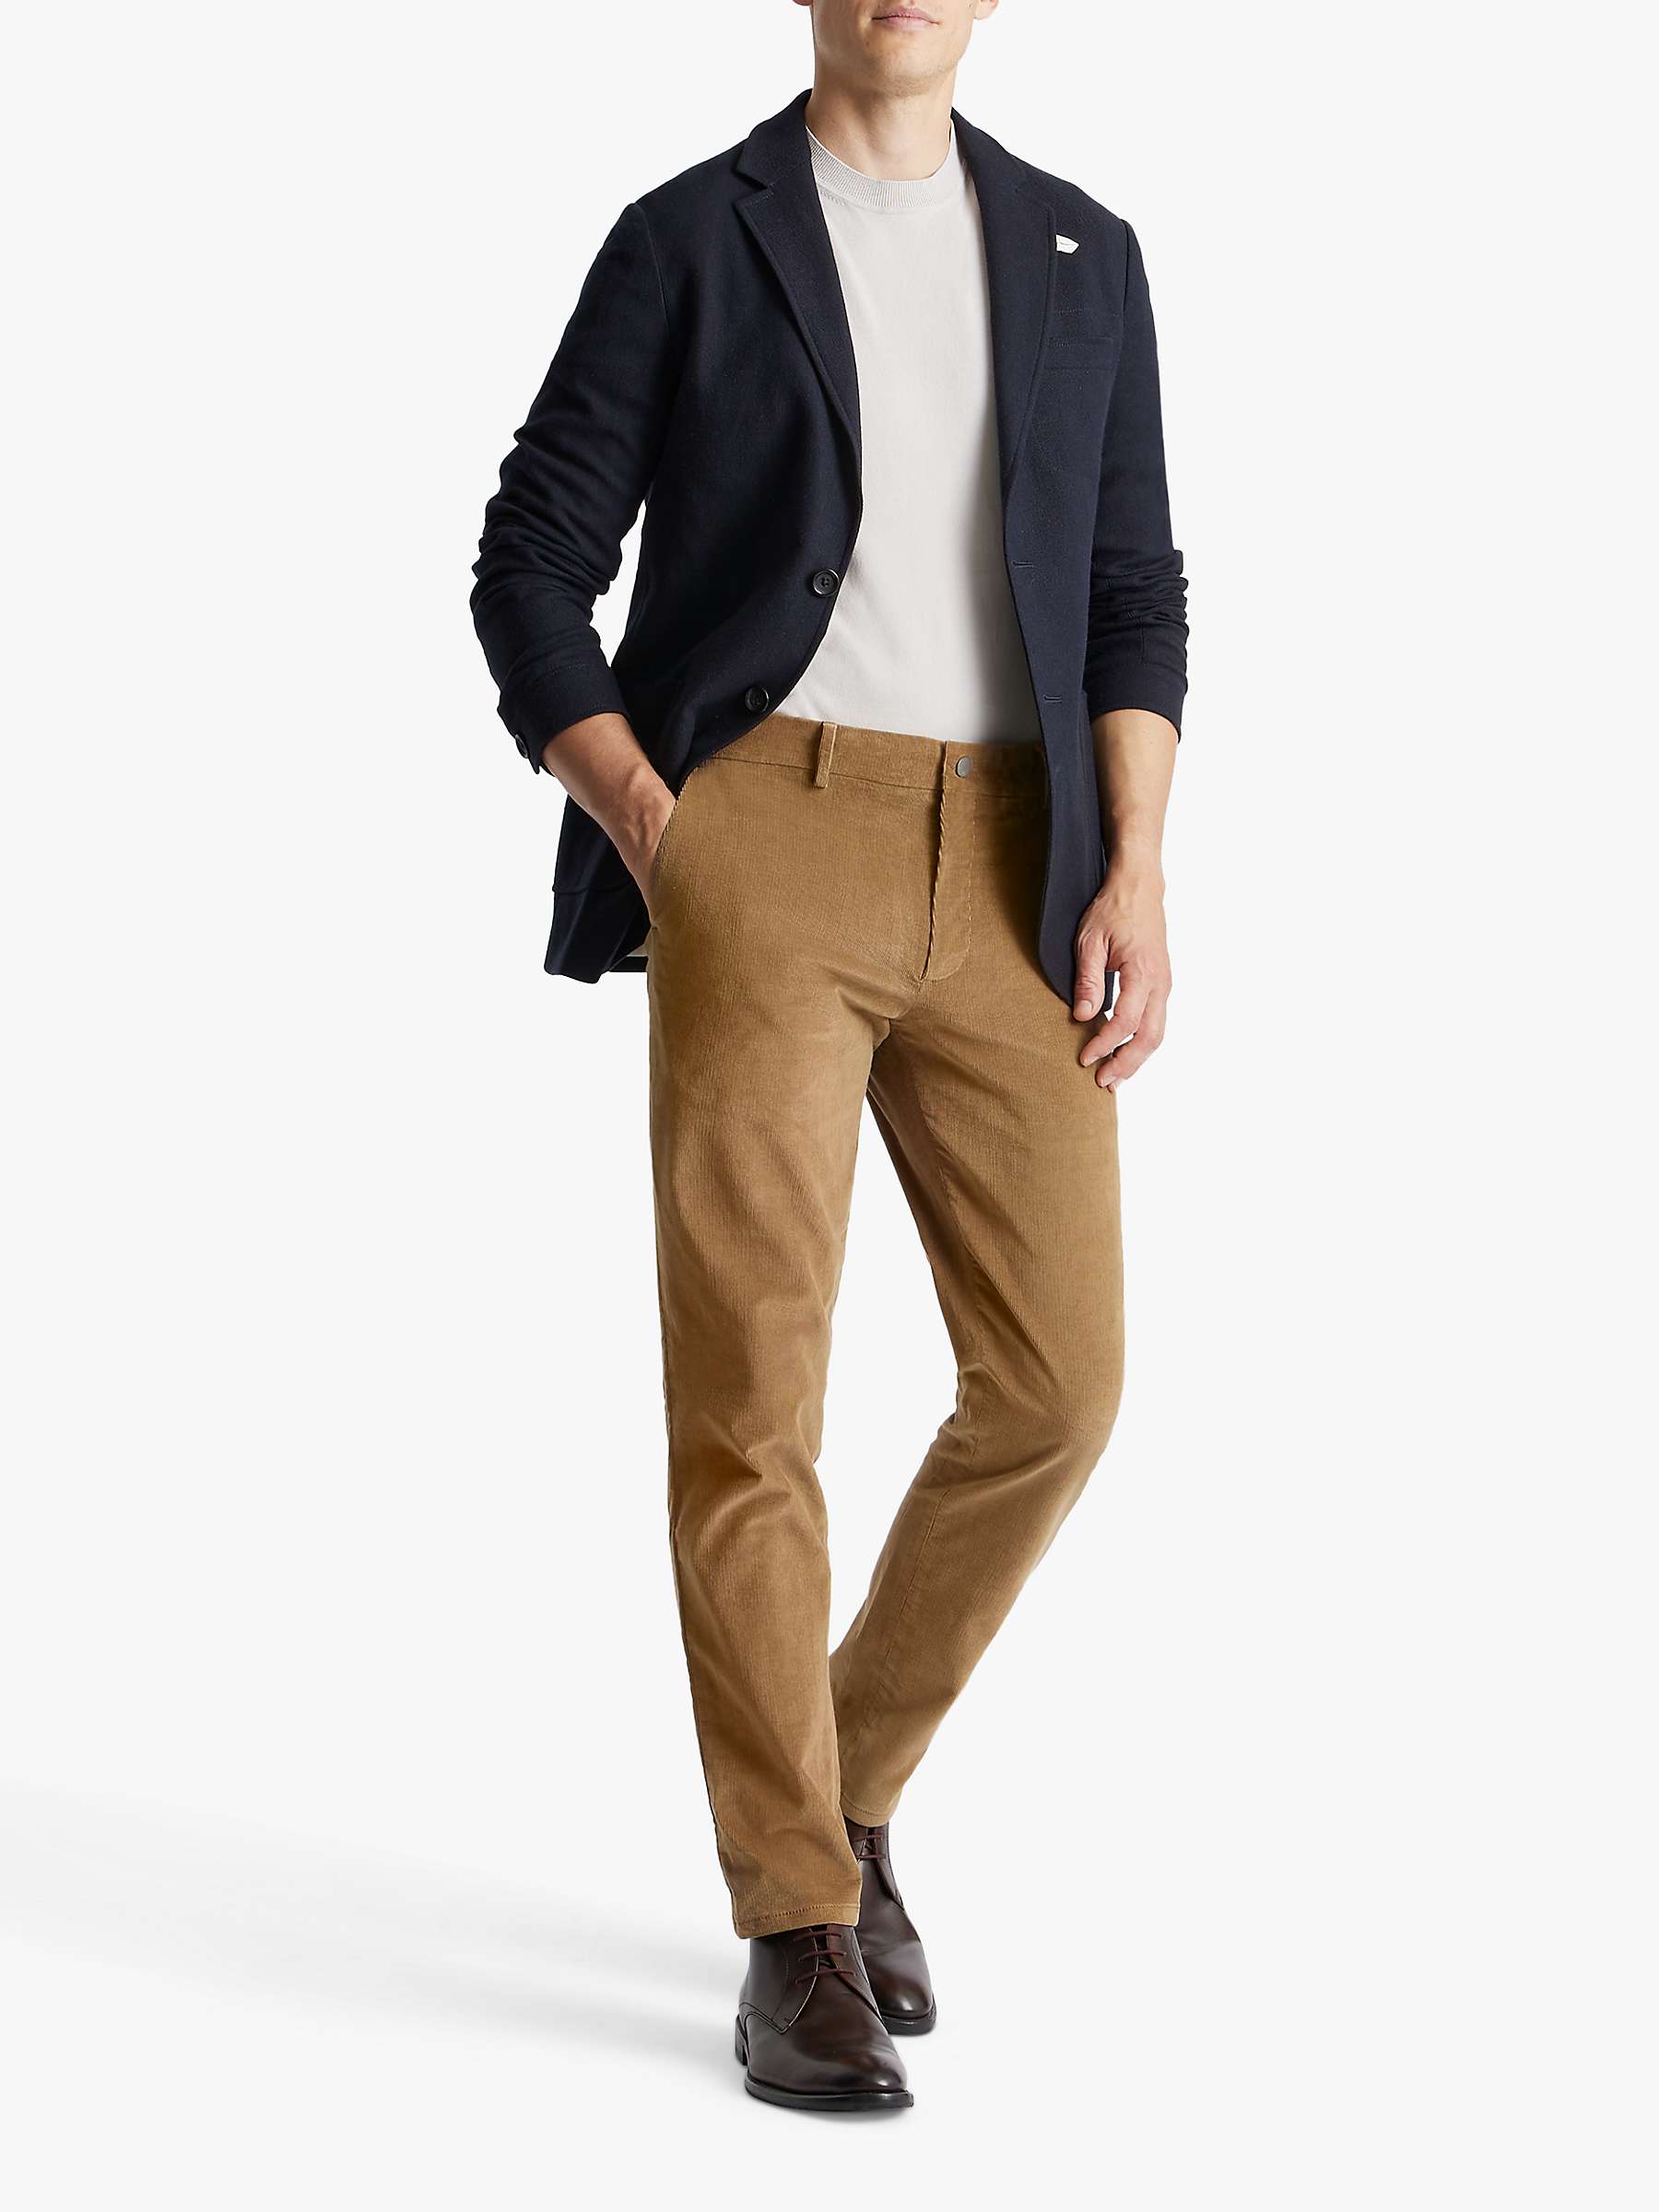 Buy SPOKE Cord Sharps Broad Thigh Trousers Online at johnlewis.com